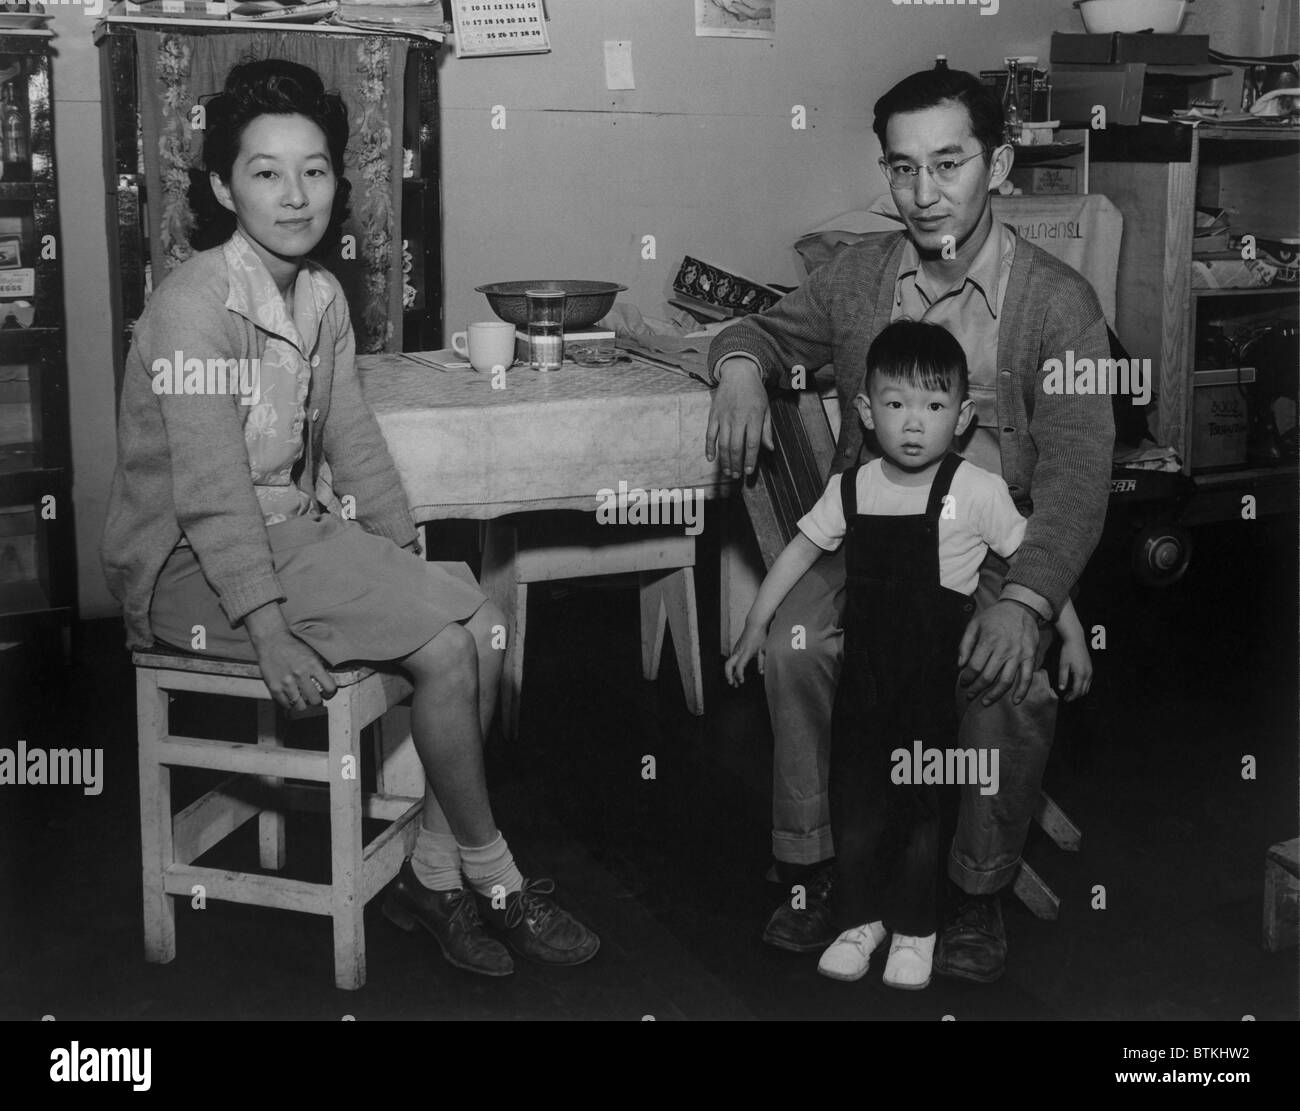 Japanese American family interned at Manzanar Relocation Center during World War II. Mr. and Mrs. Henry J. Tsurutani pose in their barracks with their son, Bruce. 1943 photograph by Ansel Adams. Stock Photo